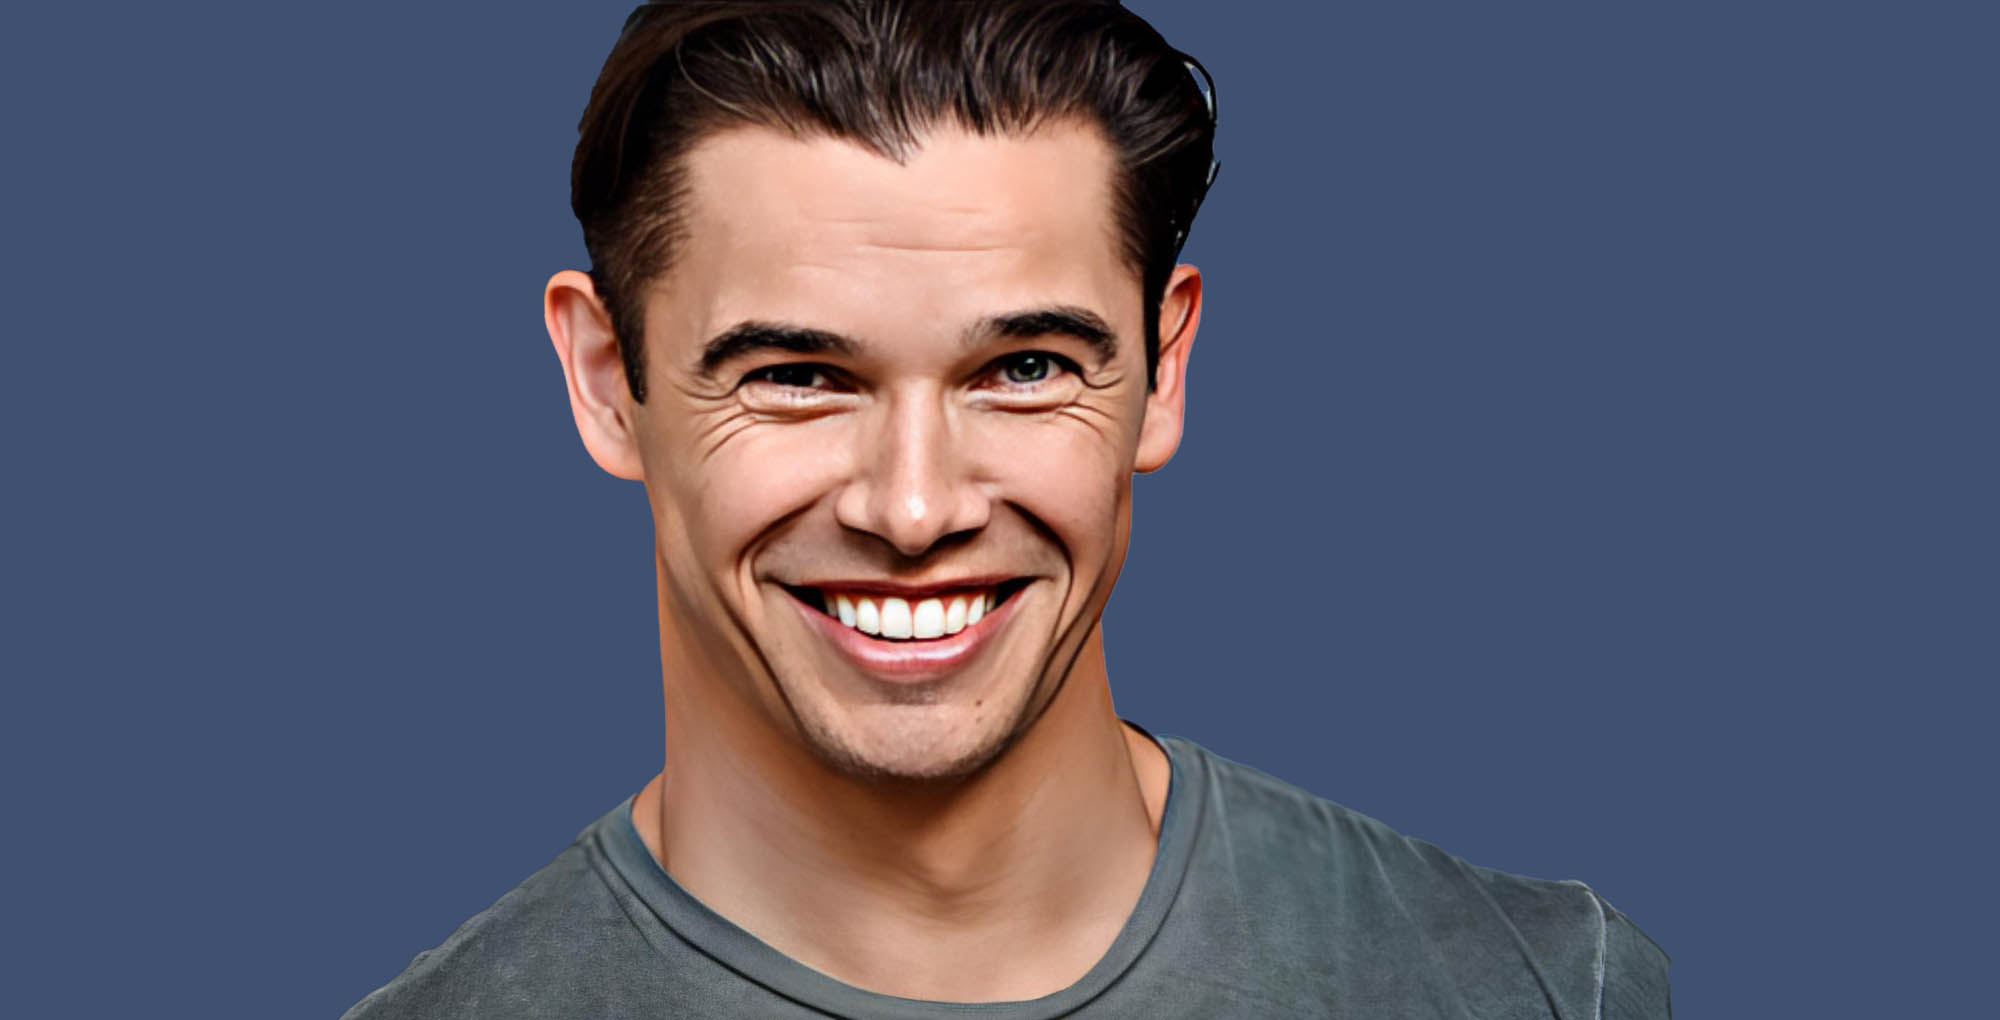 days of our lives star paul telfer celebrates his birthday.